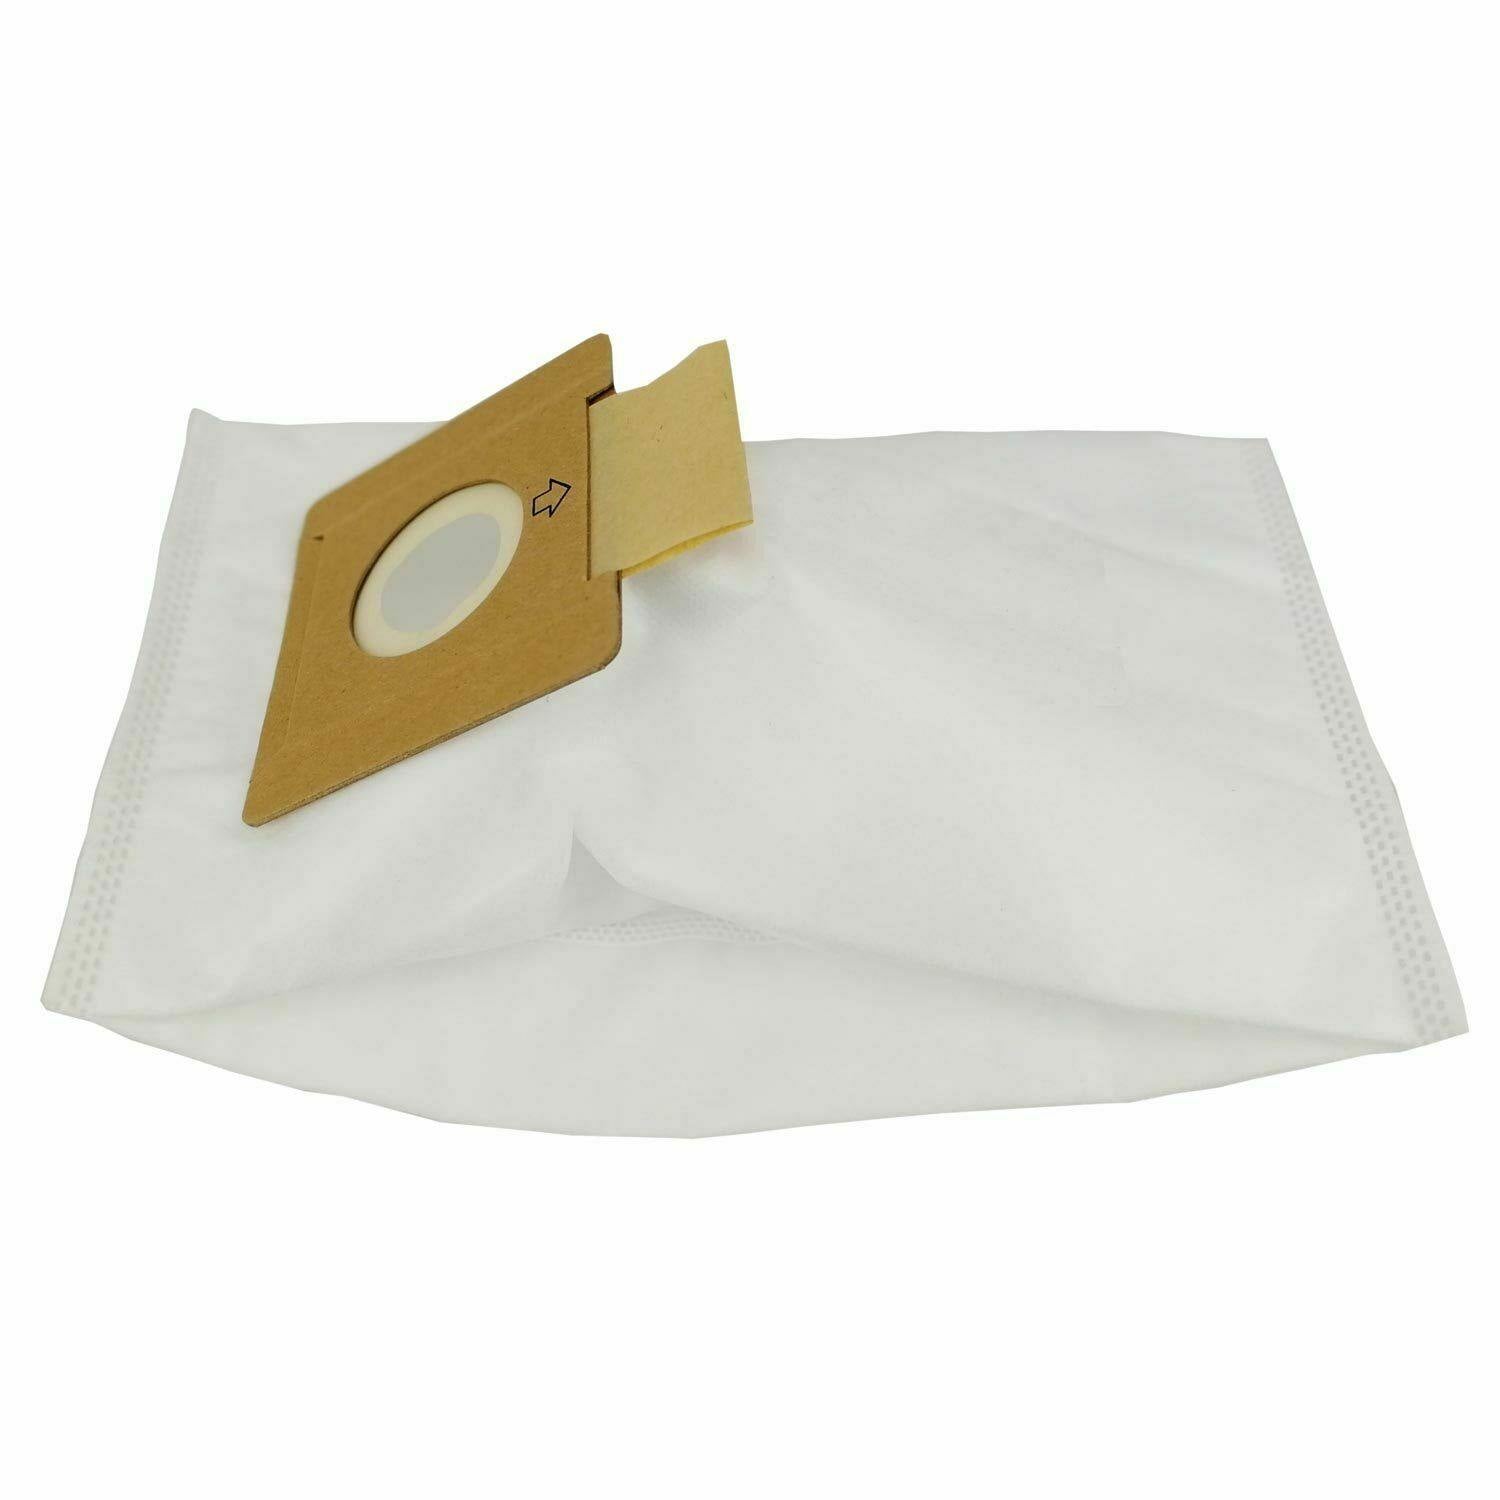 6X Vacuum Dust Bags for Hoover Smart R1 4410 4430 5001 H4012 Sparesbarn